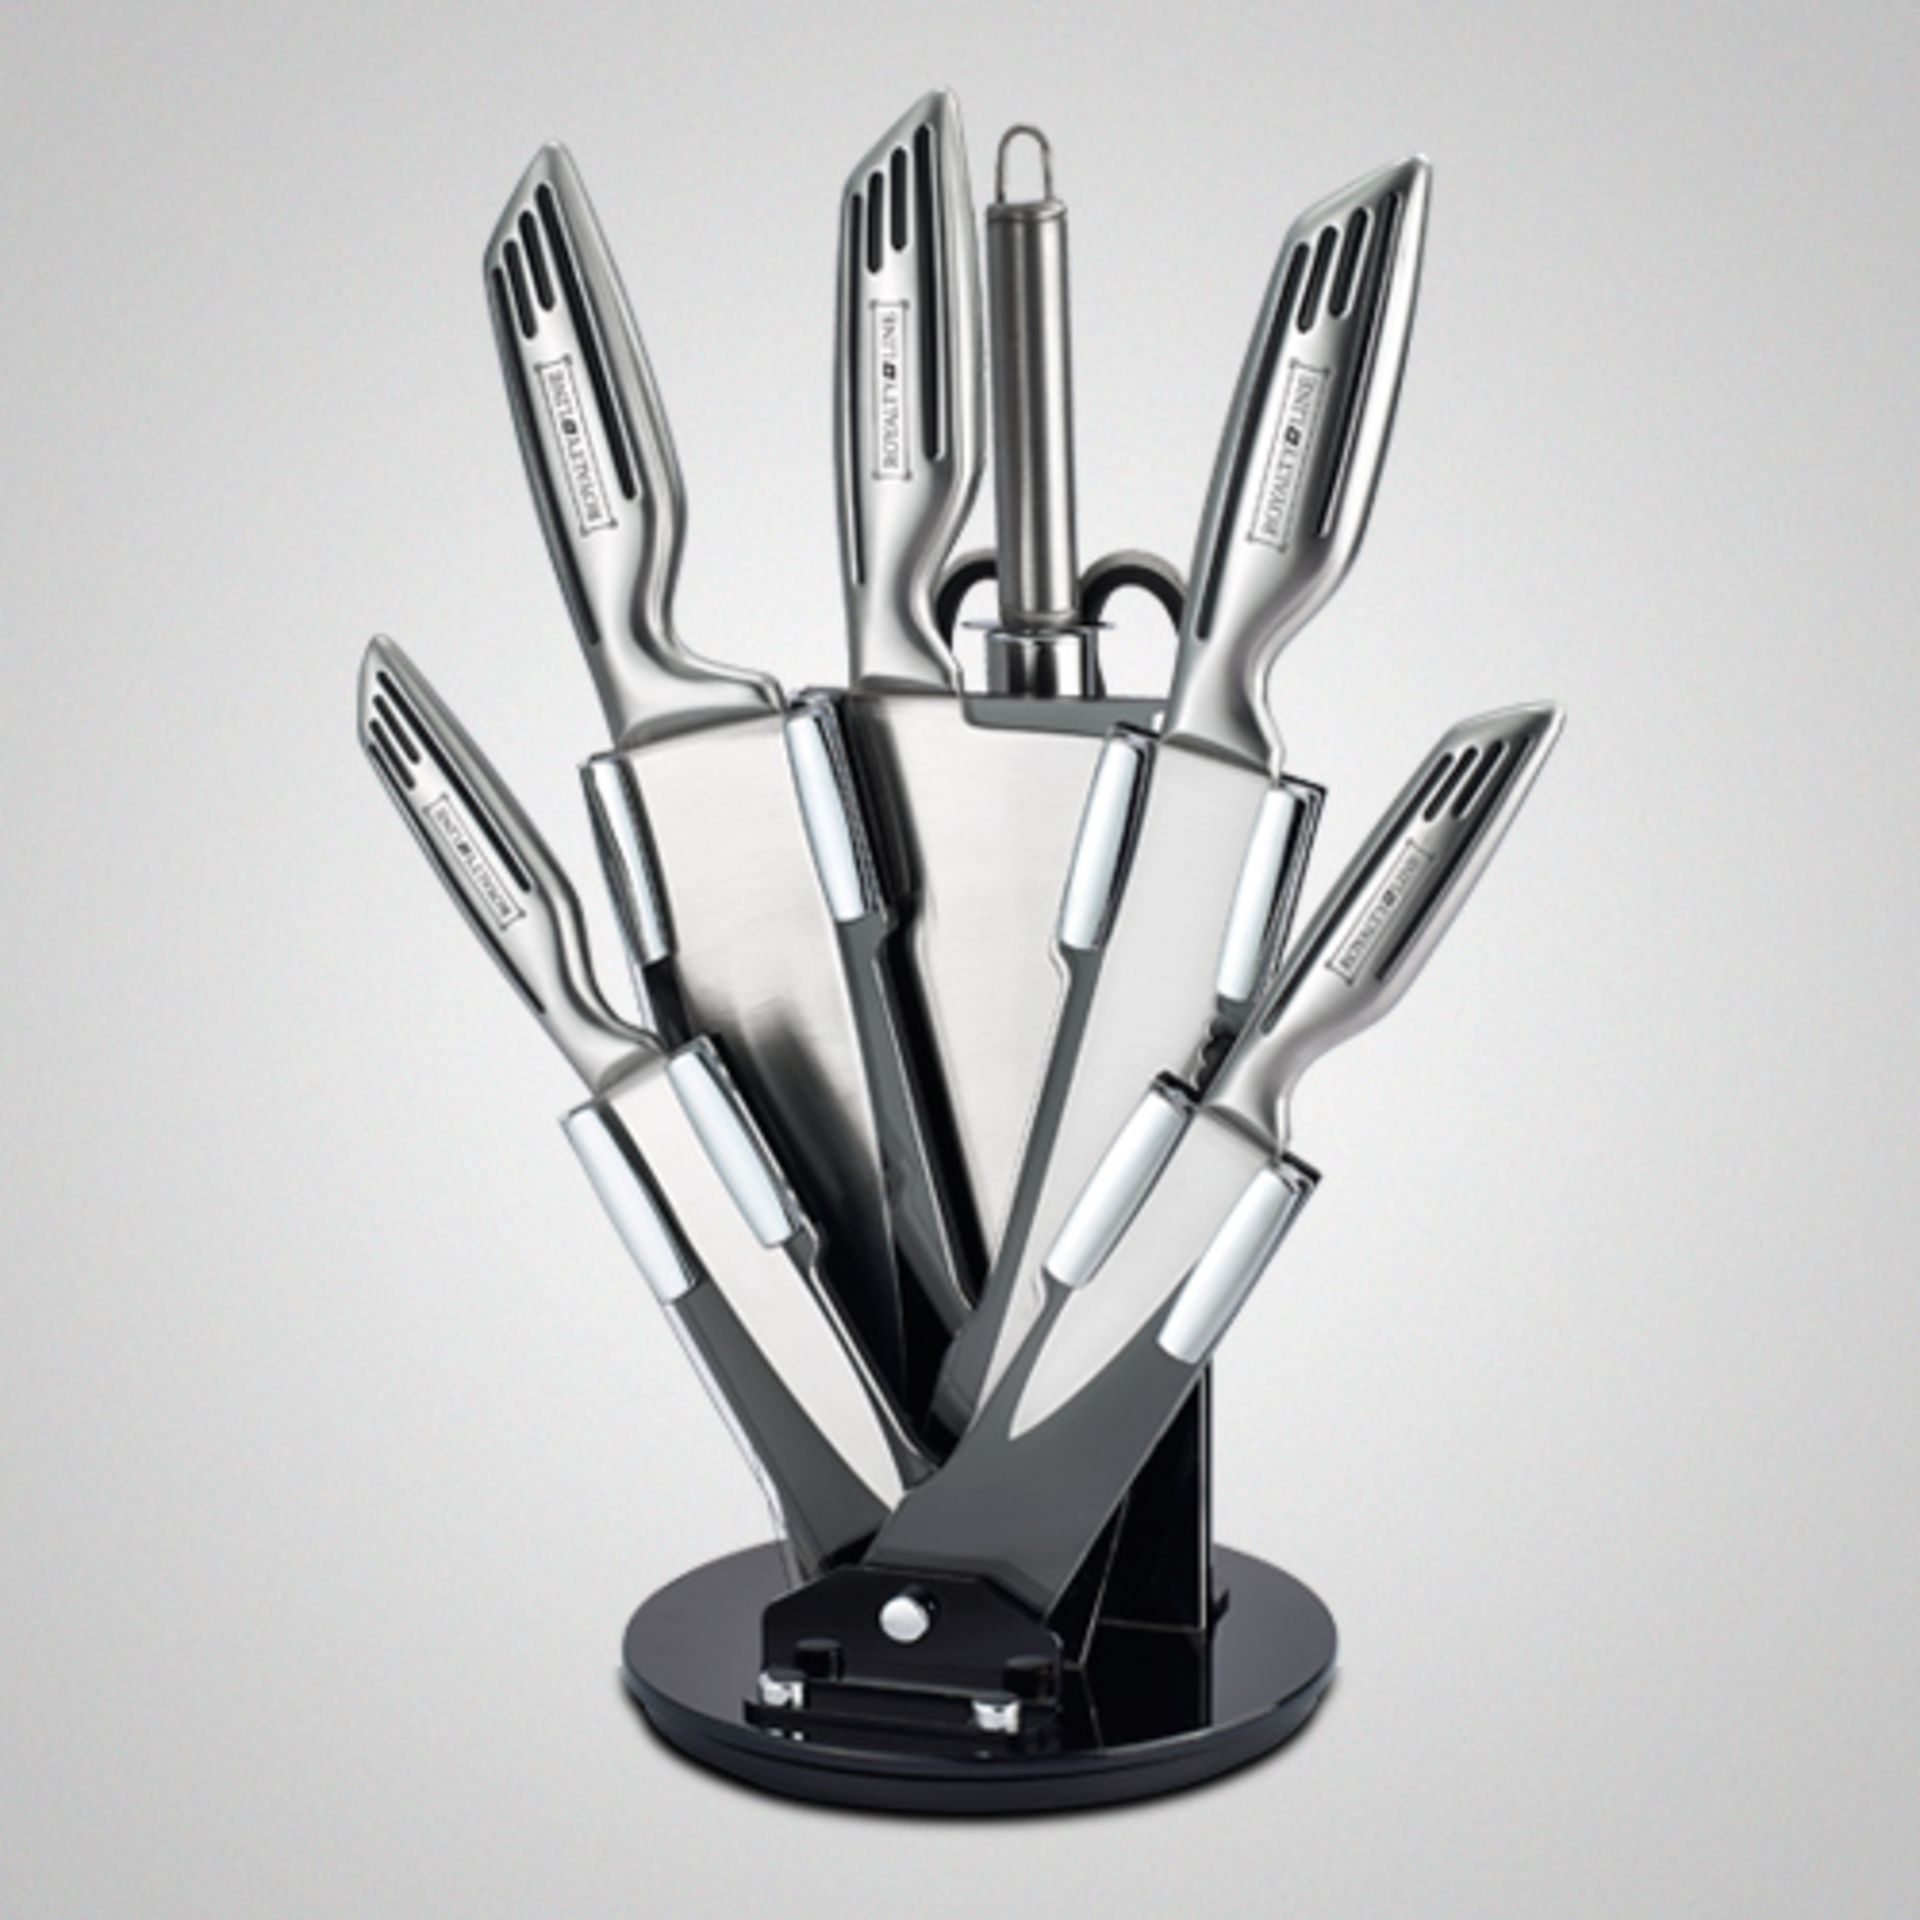 V Royalty Stainless Steel Eight Piece Kitchen Knife Set RRP 99 euros